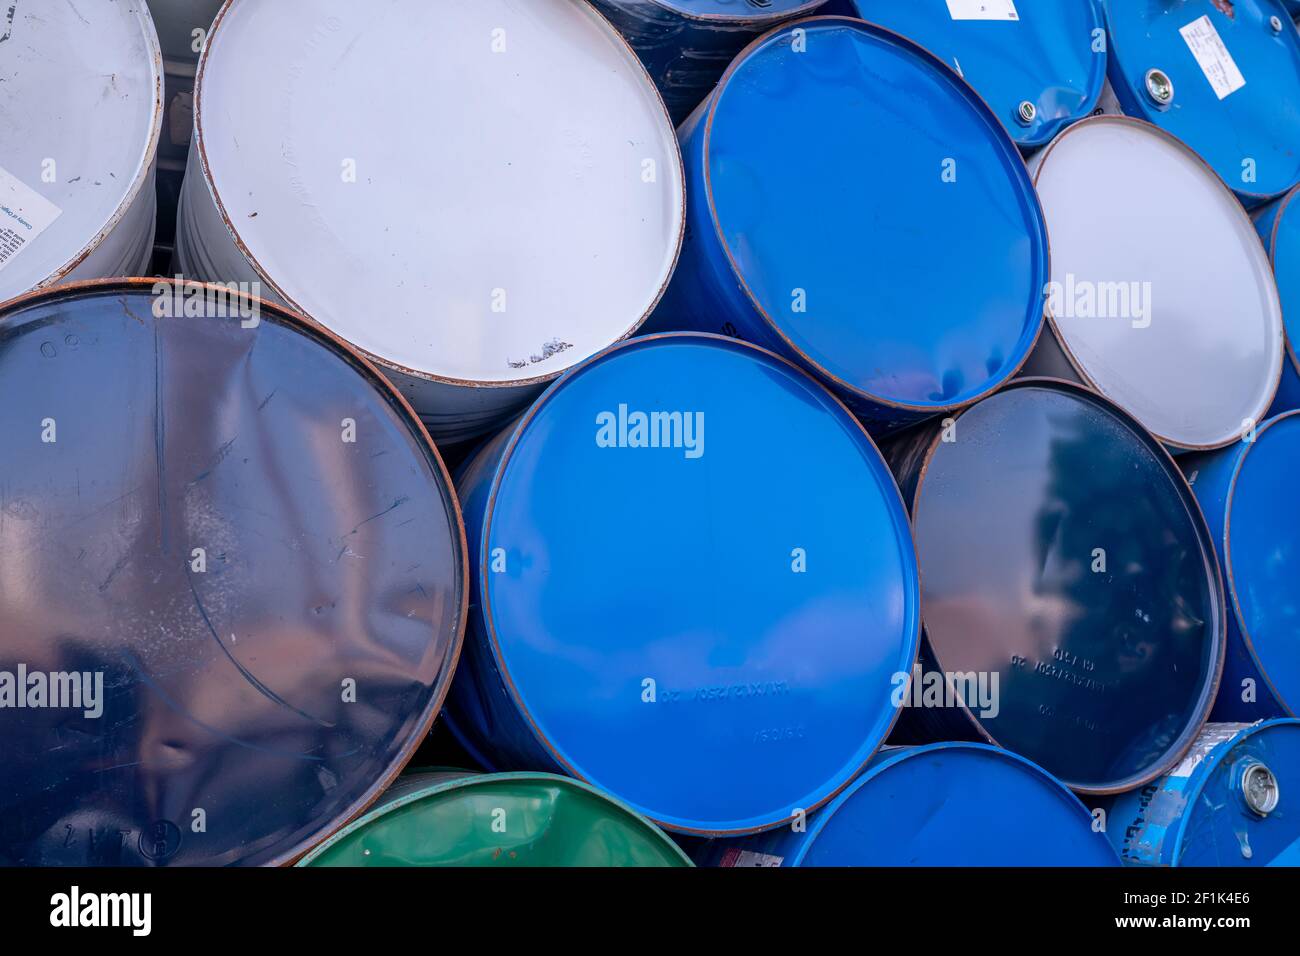 Old chemical barrels. Blue, white, and green oil drum. Steel oil tank. Toxic waste warehouse. Hazard chemical barrel. Industrial waste in old drum. Stock Photo